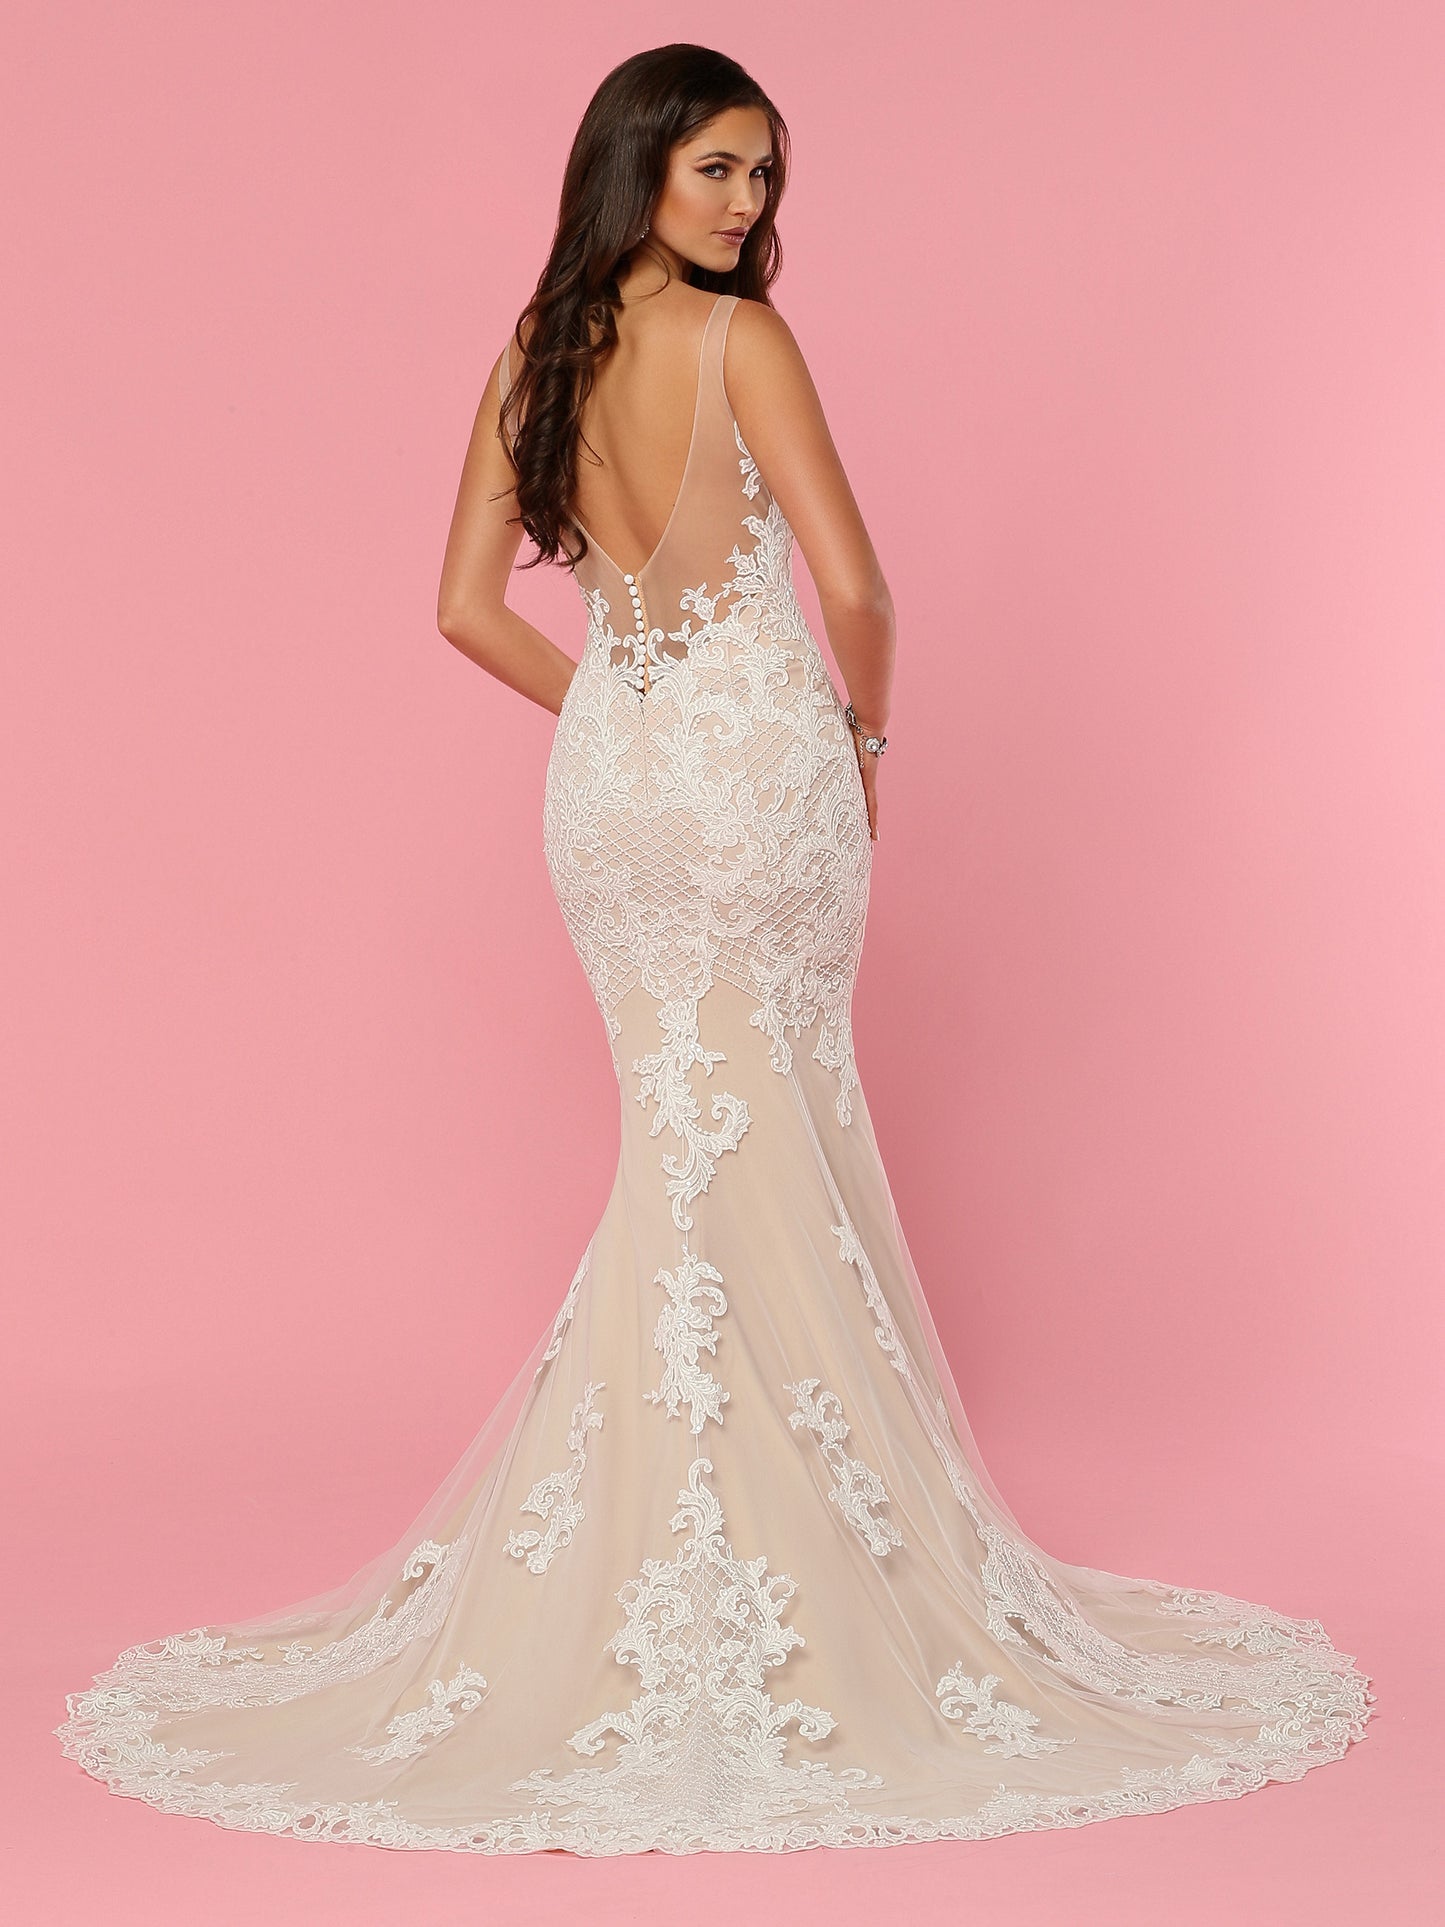 Davinci Bridal 50445 is a Long Fitted Embroidered Lace Mermaid Wedding Dress. Embellished with Sheer Plunging neckline and sheer Lace open back. Lace Accents cascading into the trumpet skirt. Lush Lace edge along the hem and train.  Available for 1-2 Week Delivery!!!  Available Sizes: 2,4,6,8,10,12,14,16,18,20  Available Colors: Ivory/Nude, Ivory/Ivory